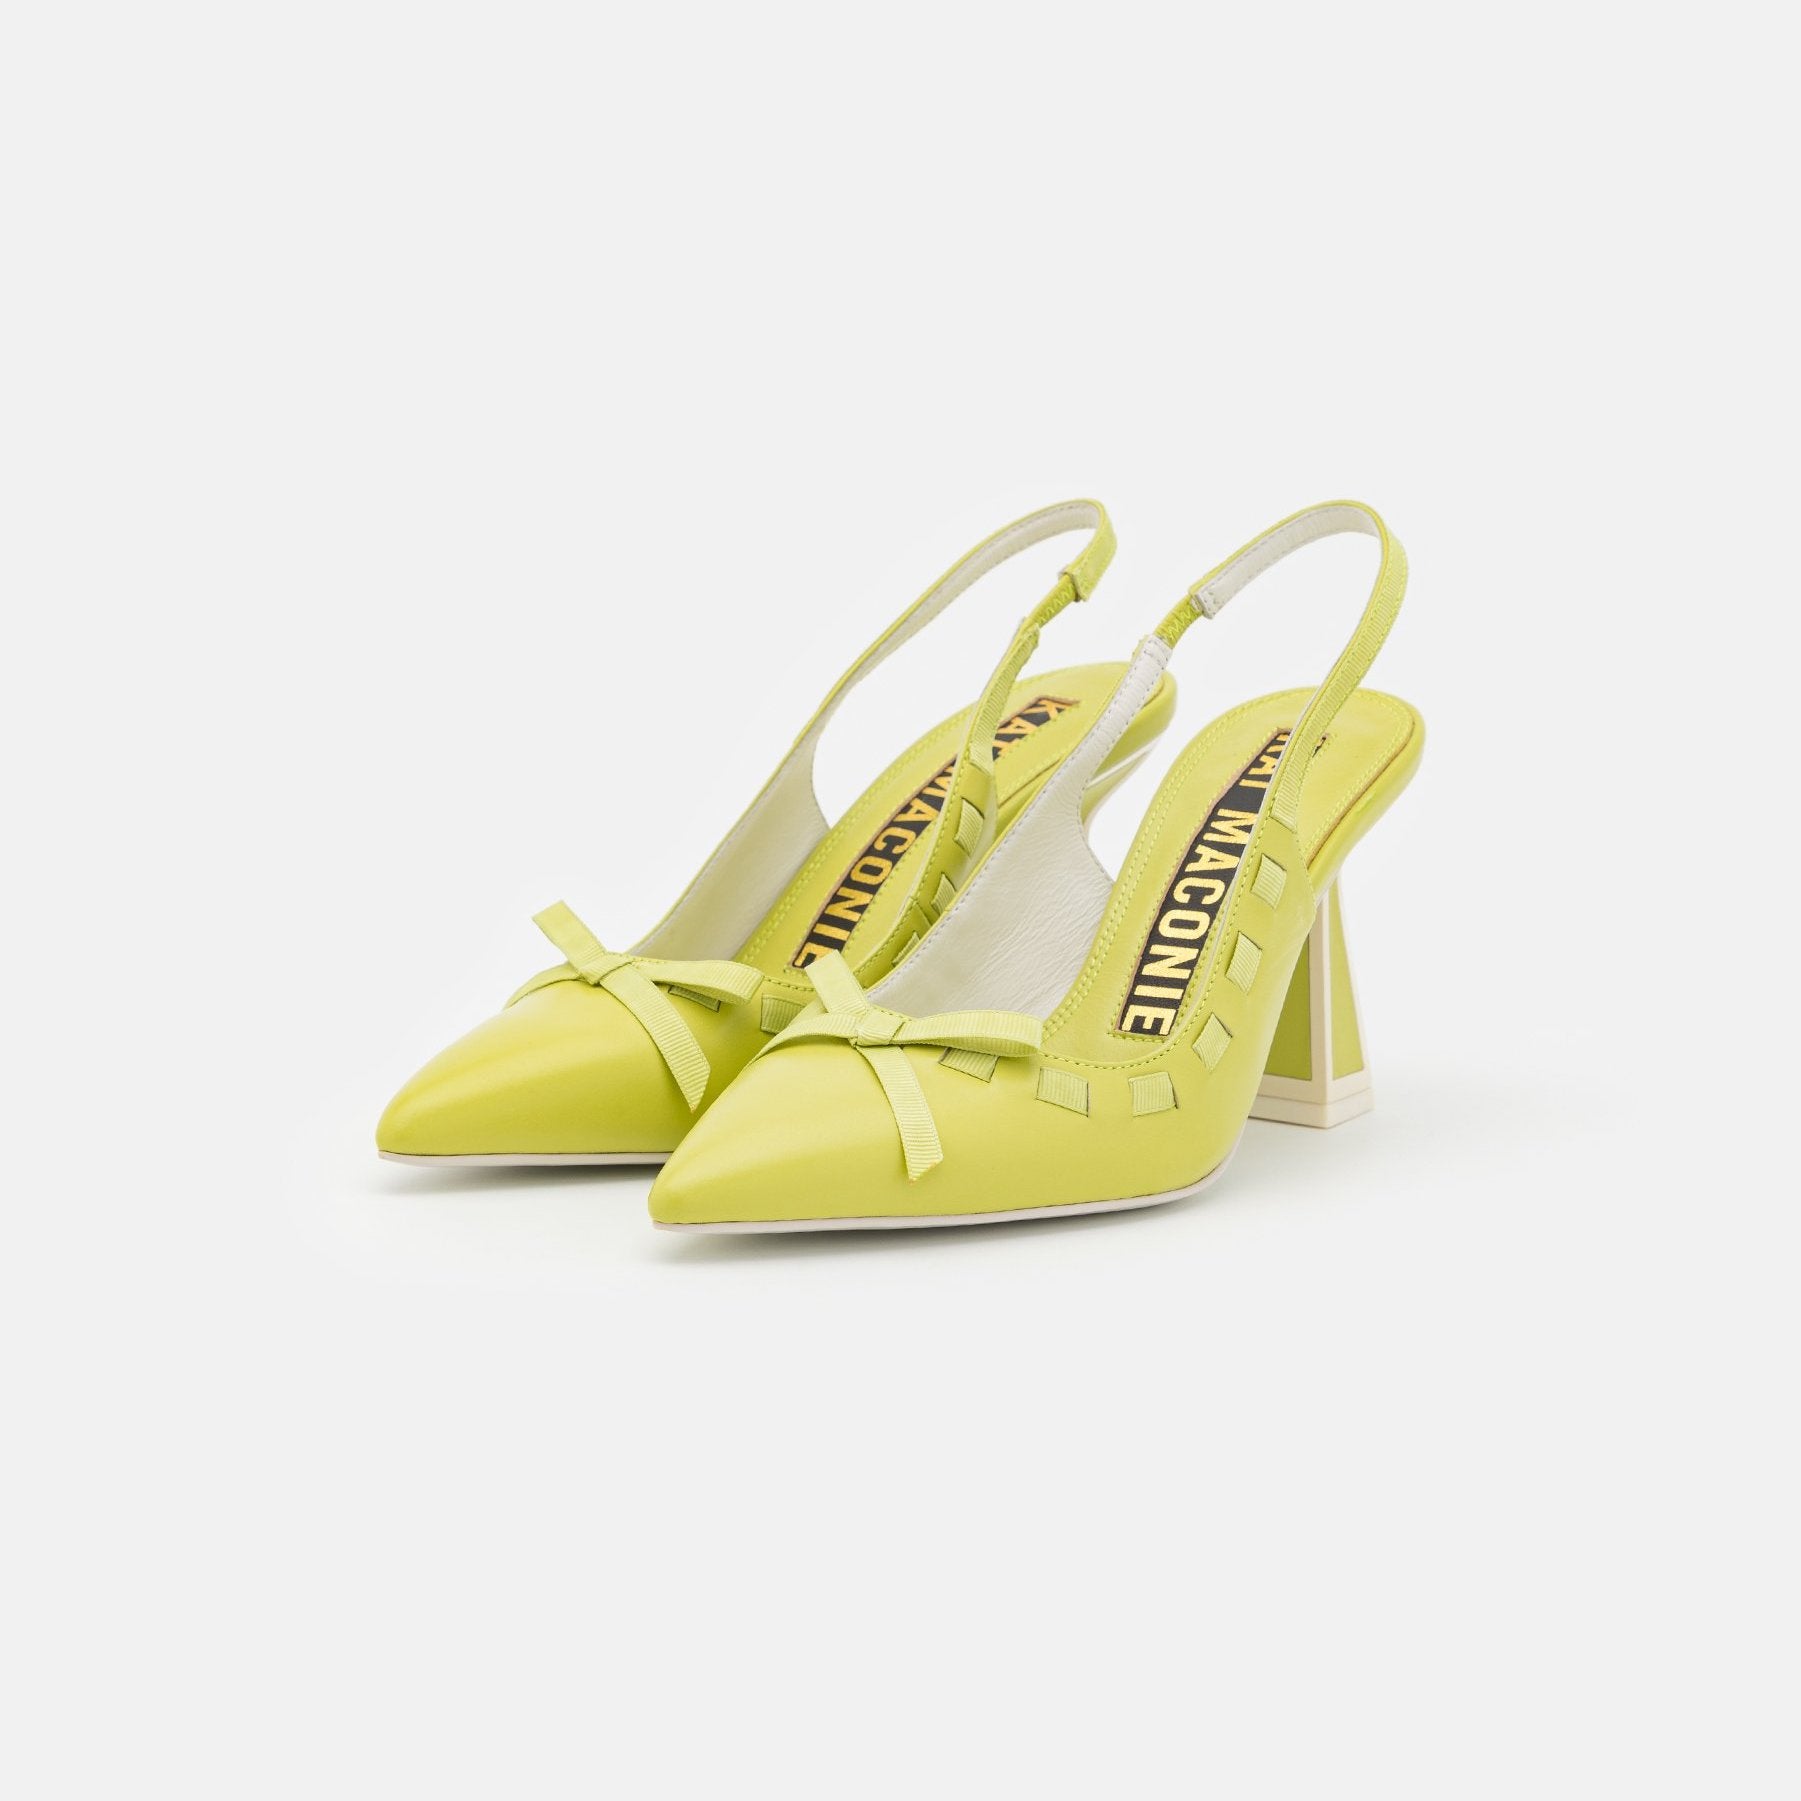 outer side view of a pair of the kat maconie Kacy high heel in the color celery.